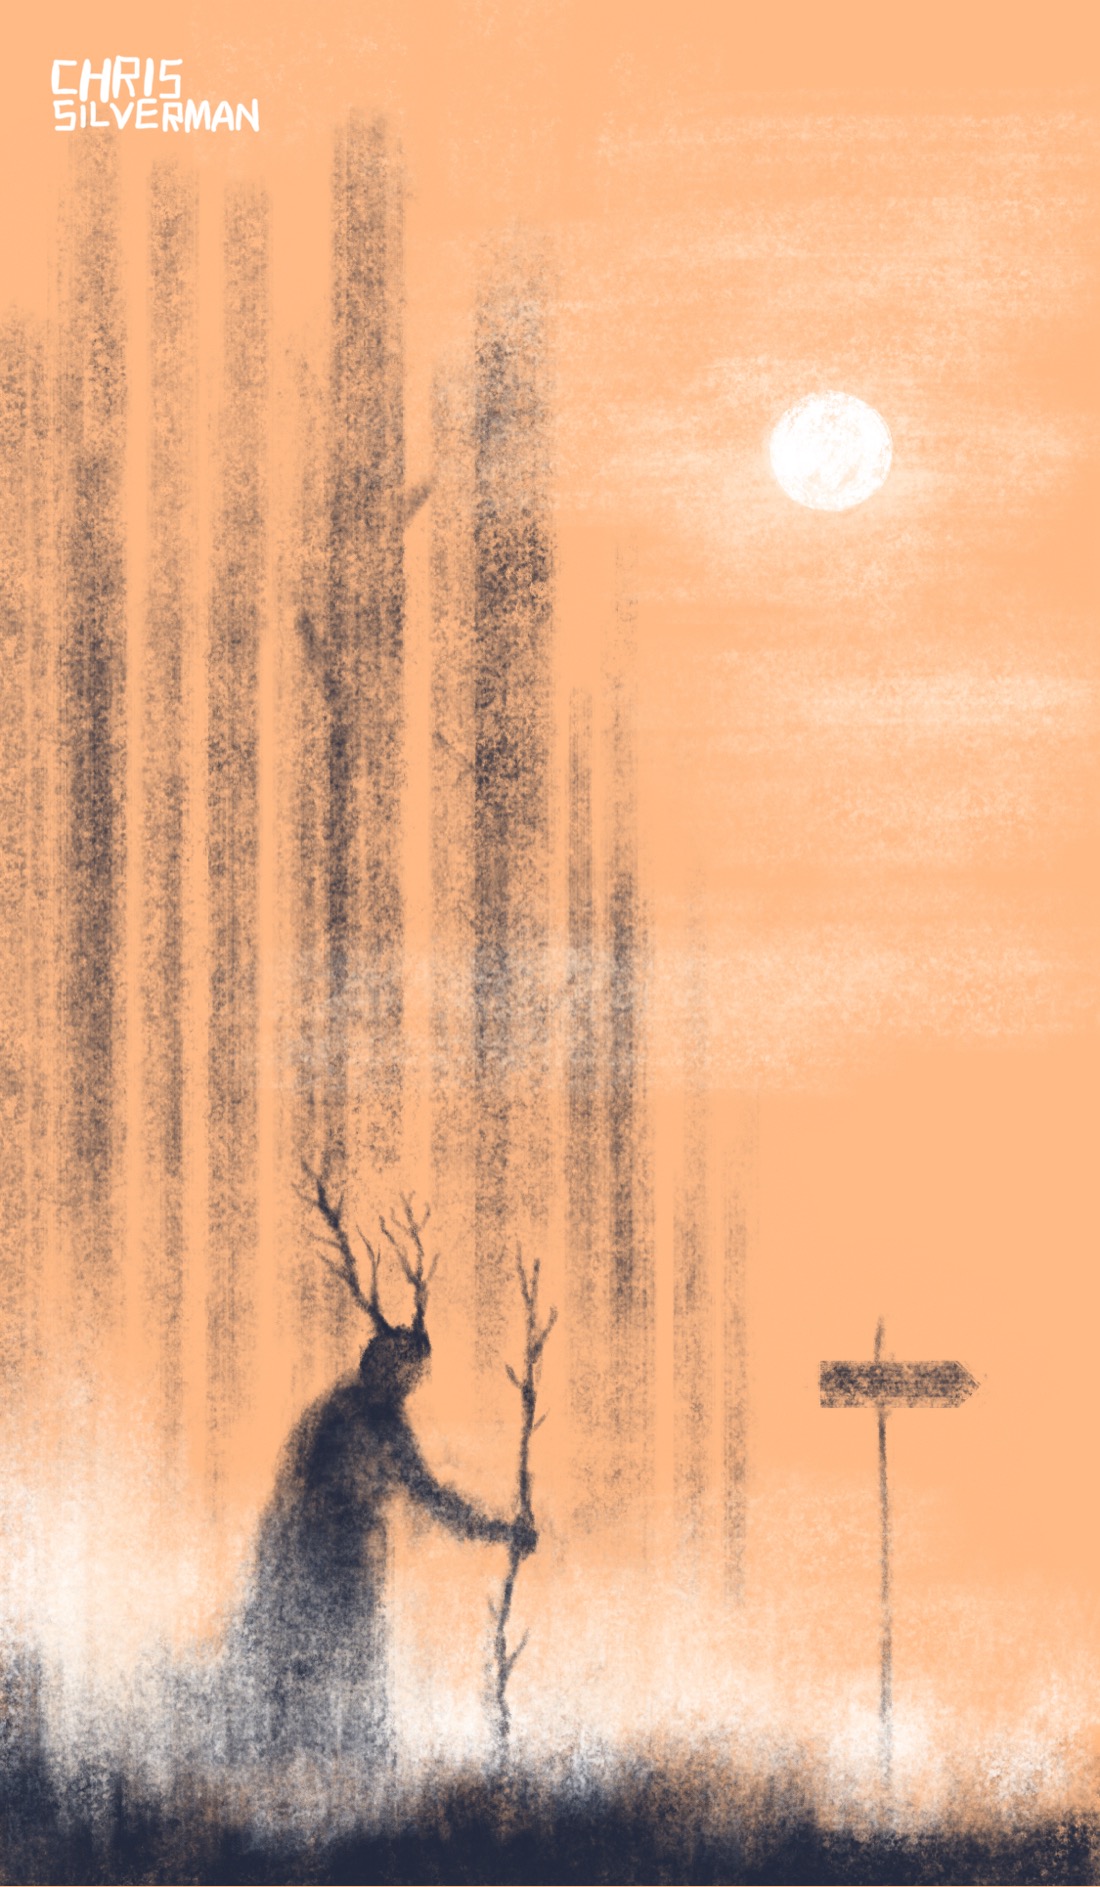 The edge of a foggy wood, set against a light orange sky. Looming out of the fog are many straight, tall tree trunks. The branches aren't visible, giving the impression of a forest of dead trees. A low white fog covers the ground. Standing among the trees is a tall figure wearing a robe, with two horns that look like tree roots sticking up out of its head. It is holding a tall staff, which also has small roots and branches sticking out of it. It is walking towards the right of the drawing, where there is a small sign pointing to the right. No lettering is visible on the sign. A hazy white sun hangs high in the sky.